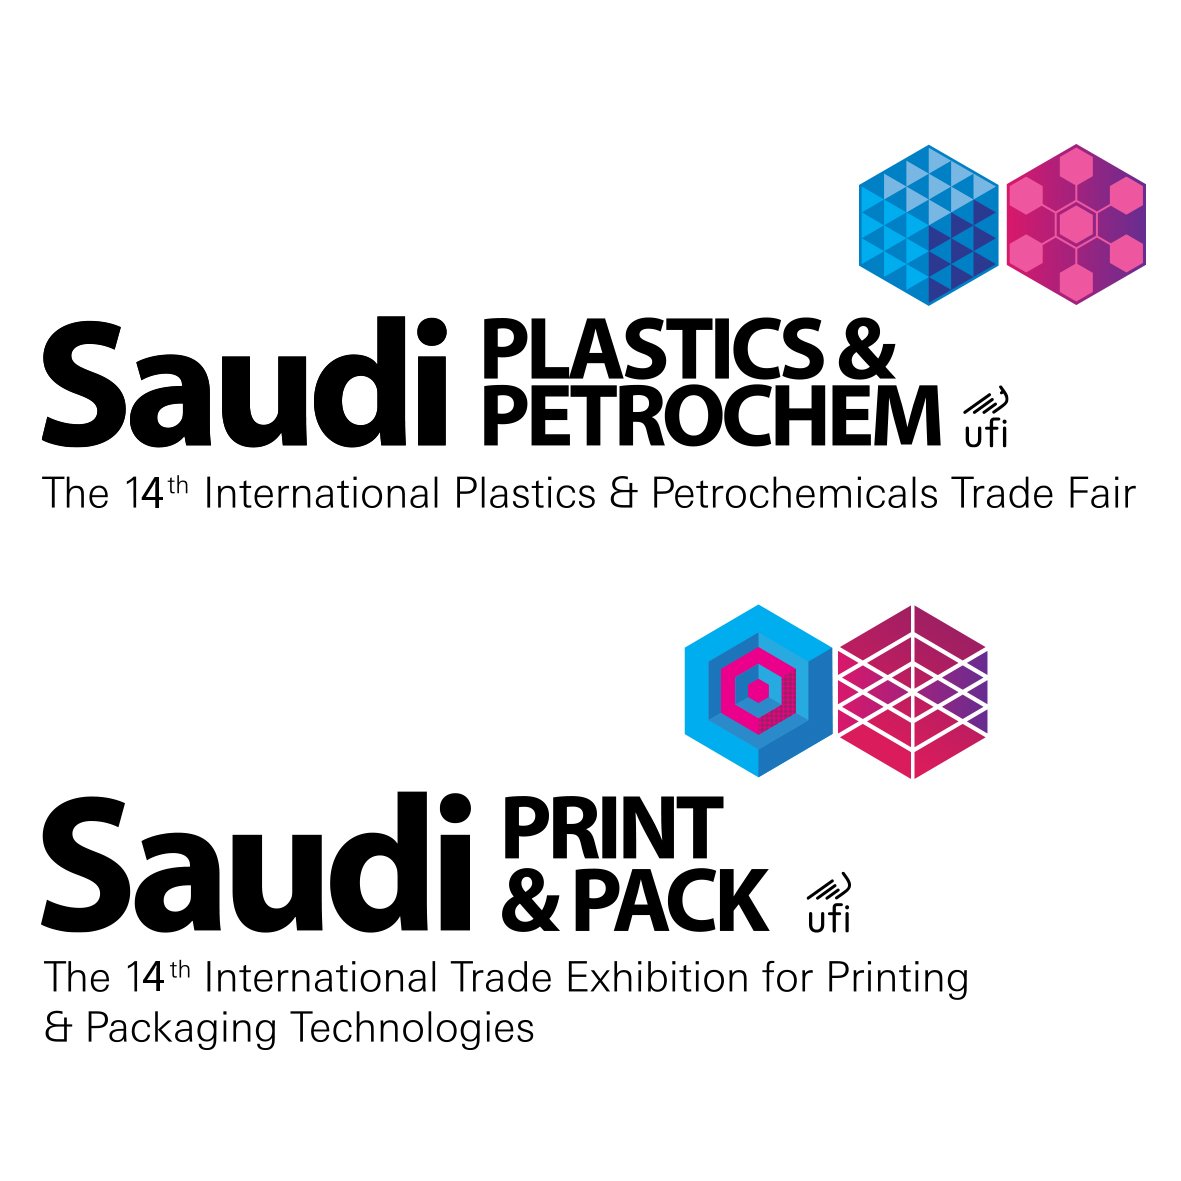 The 14th edition of Saudi Plastics and Petrochemicals and Print and Pack Accompanies Saudi 2030 vision at the Jeddah Center for Forums and Events in 2017